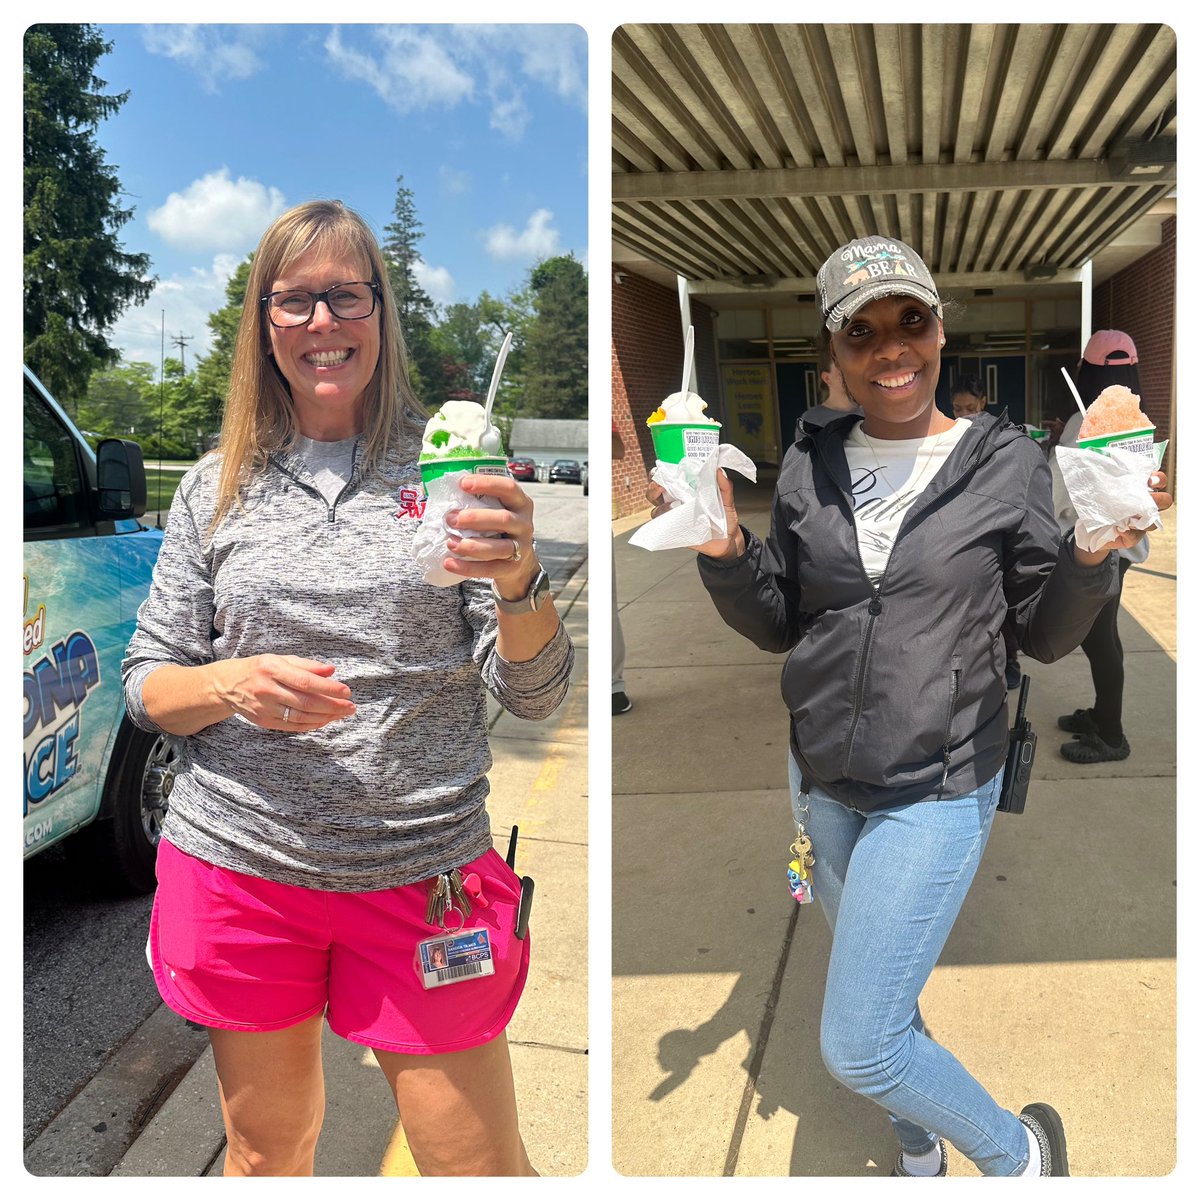 Huge shout out to @FMSDragonsPTA for treating our COOL staff to Kona Ice for #TeacherAppreciationWeek ! @SchifferB @Fschrader1